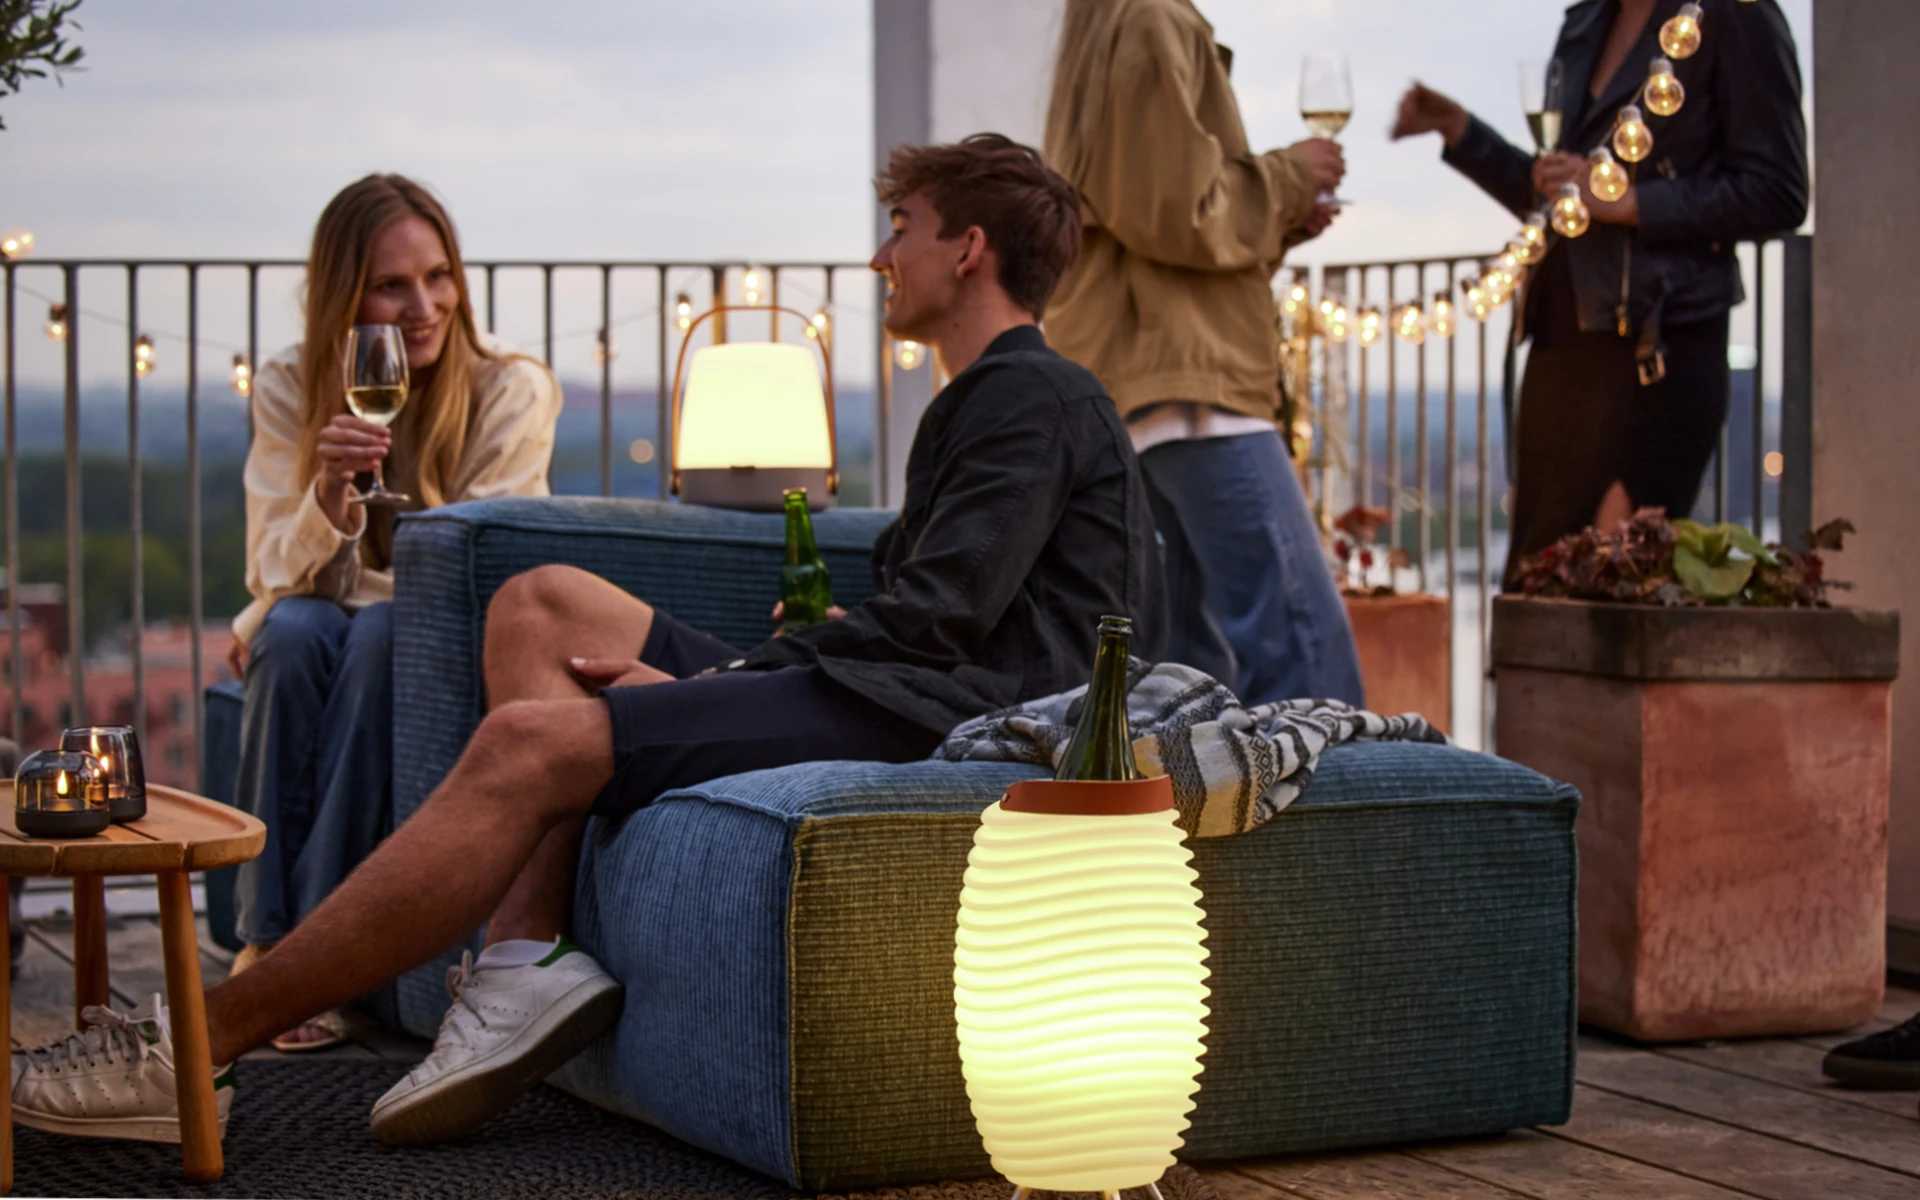 Kooduu Synergy in 1 – Bluetooth Cooler dimmable | Speaker, Wine and lamp LED